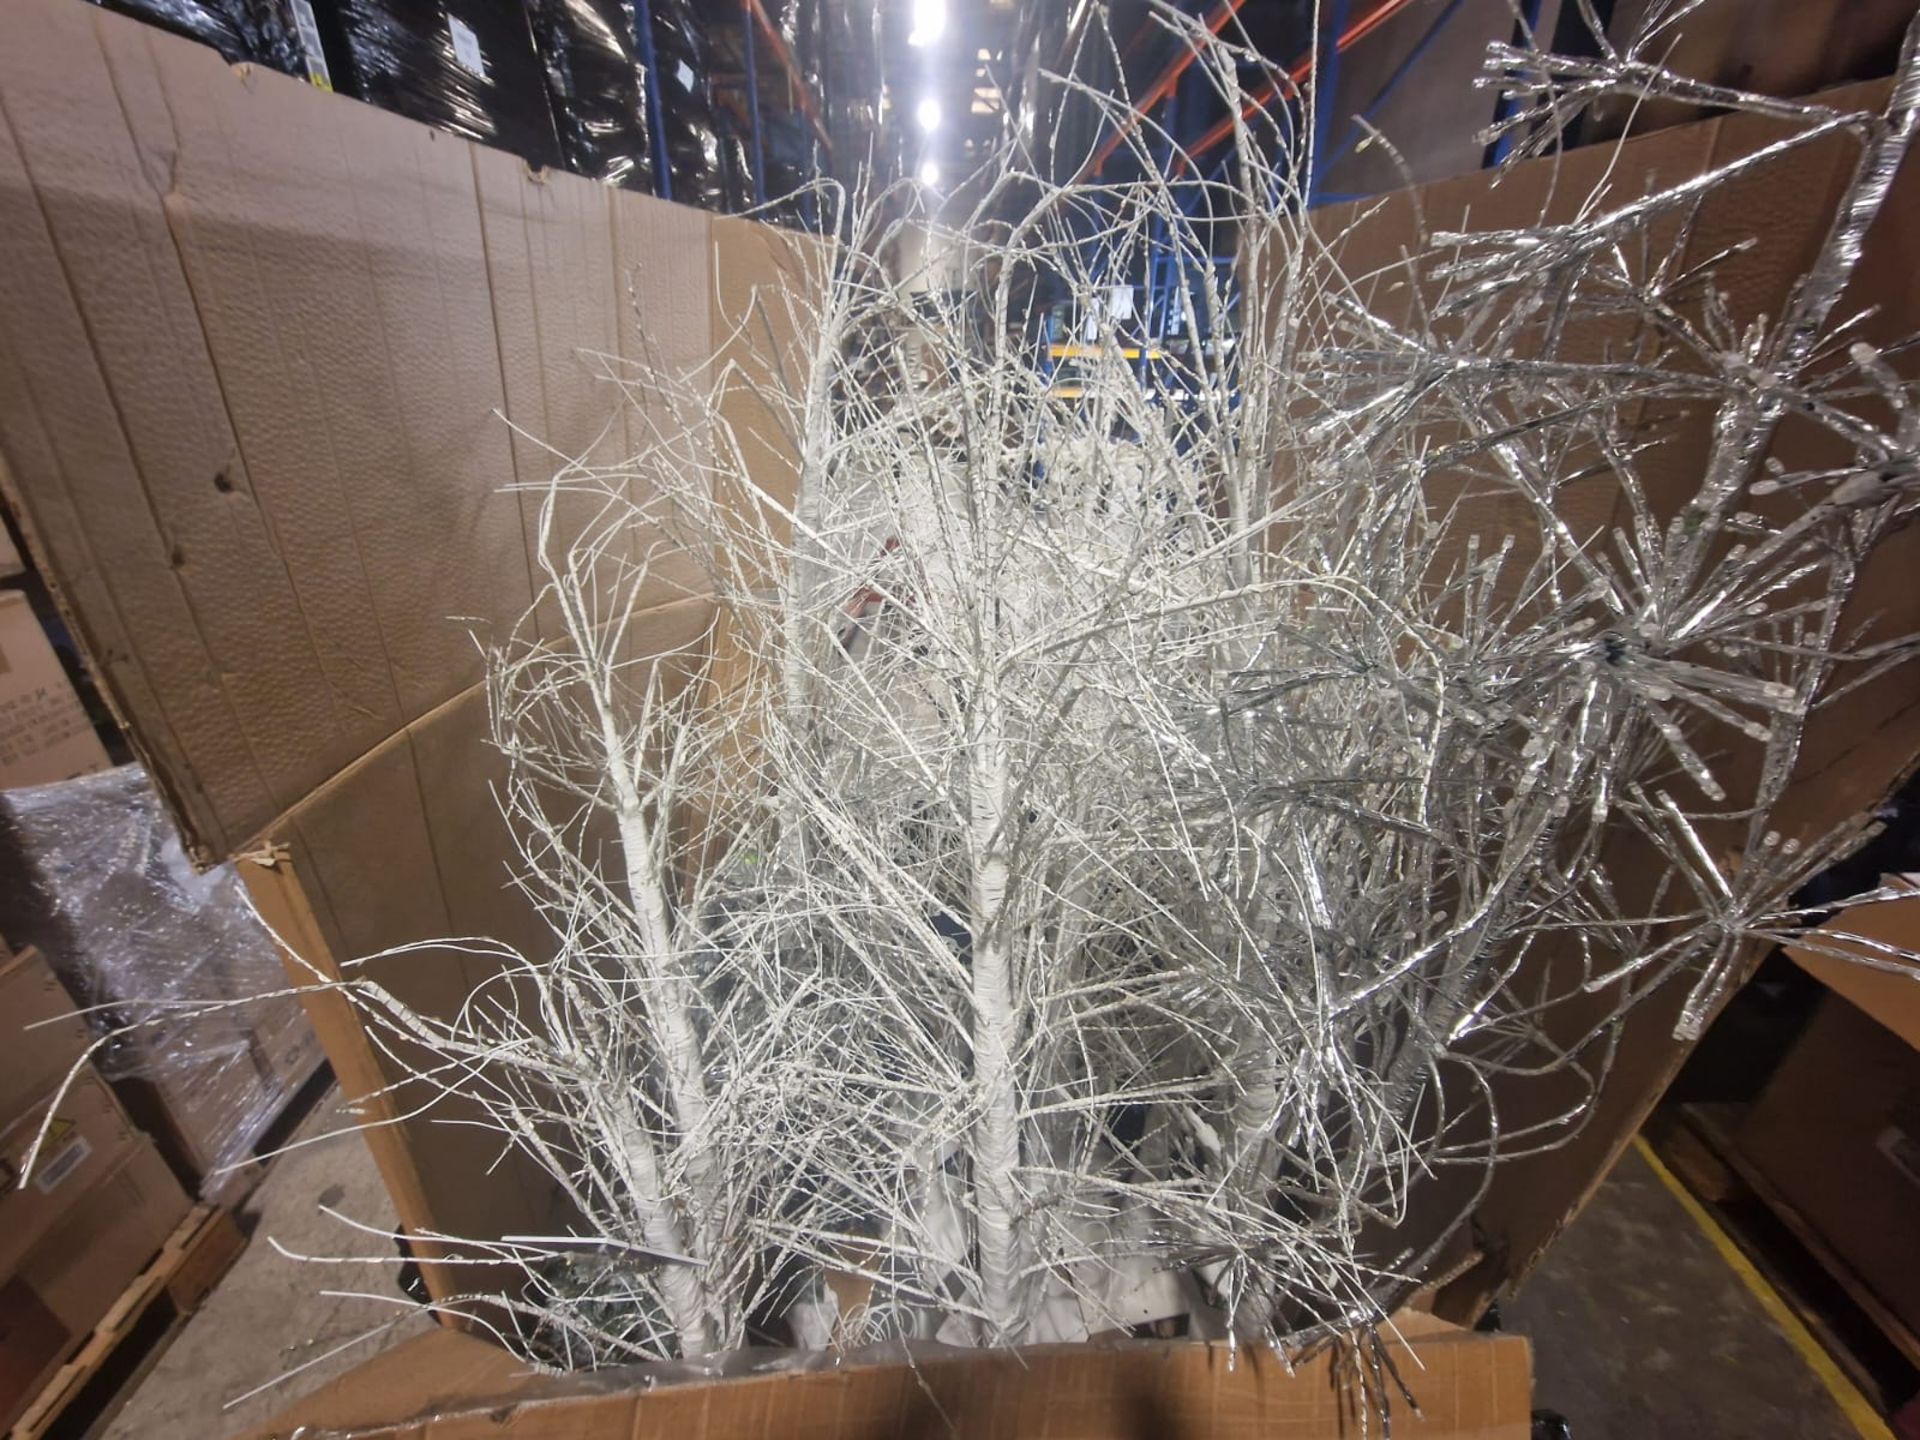 1 PALLET OF CLEARANCE LED LIGHTS,LED TREES, DEOCRATIONS & MORE!